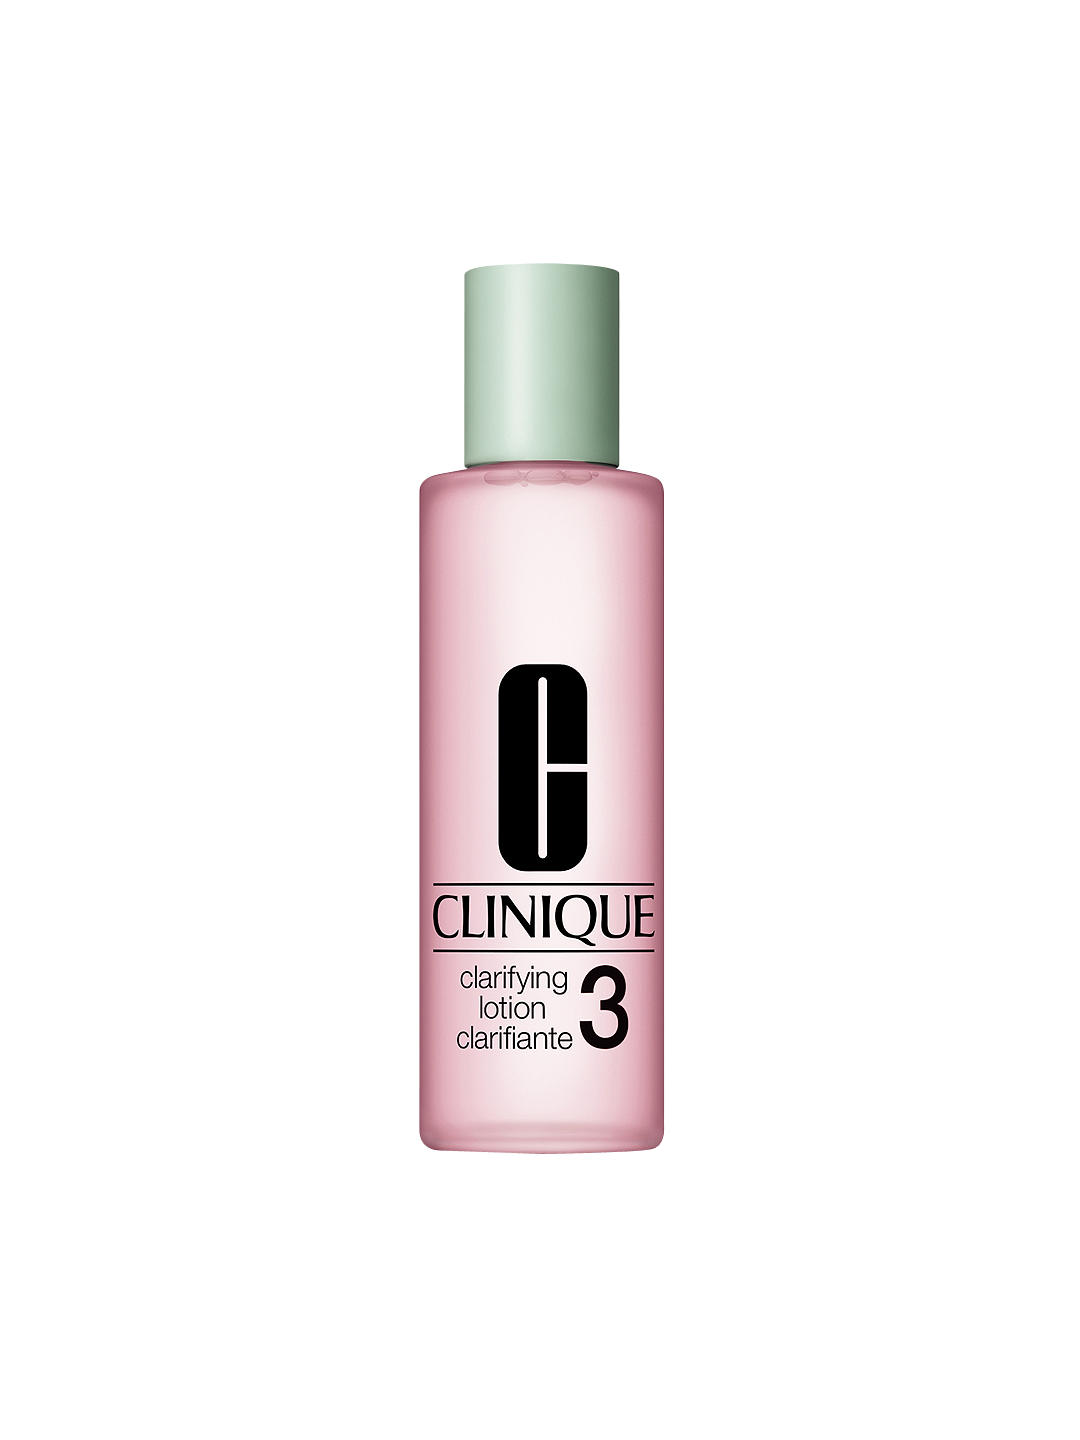 Clinique Clarifying Lotion 3, 400ml 1